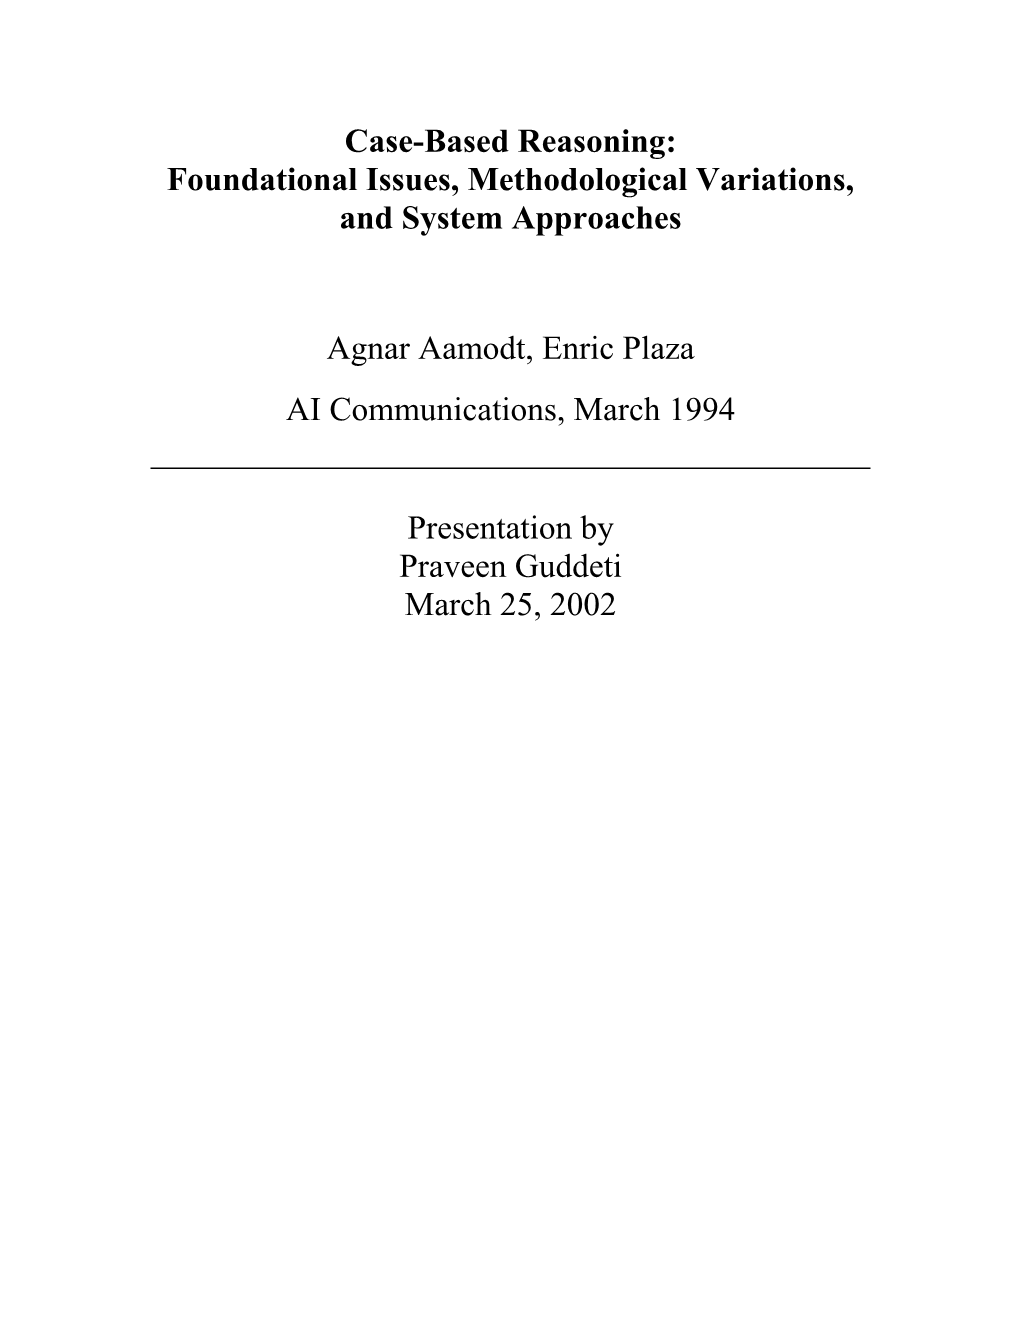 Foundational Issues, Methodological Variations